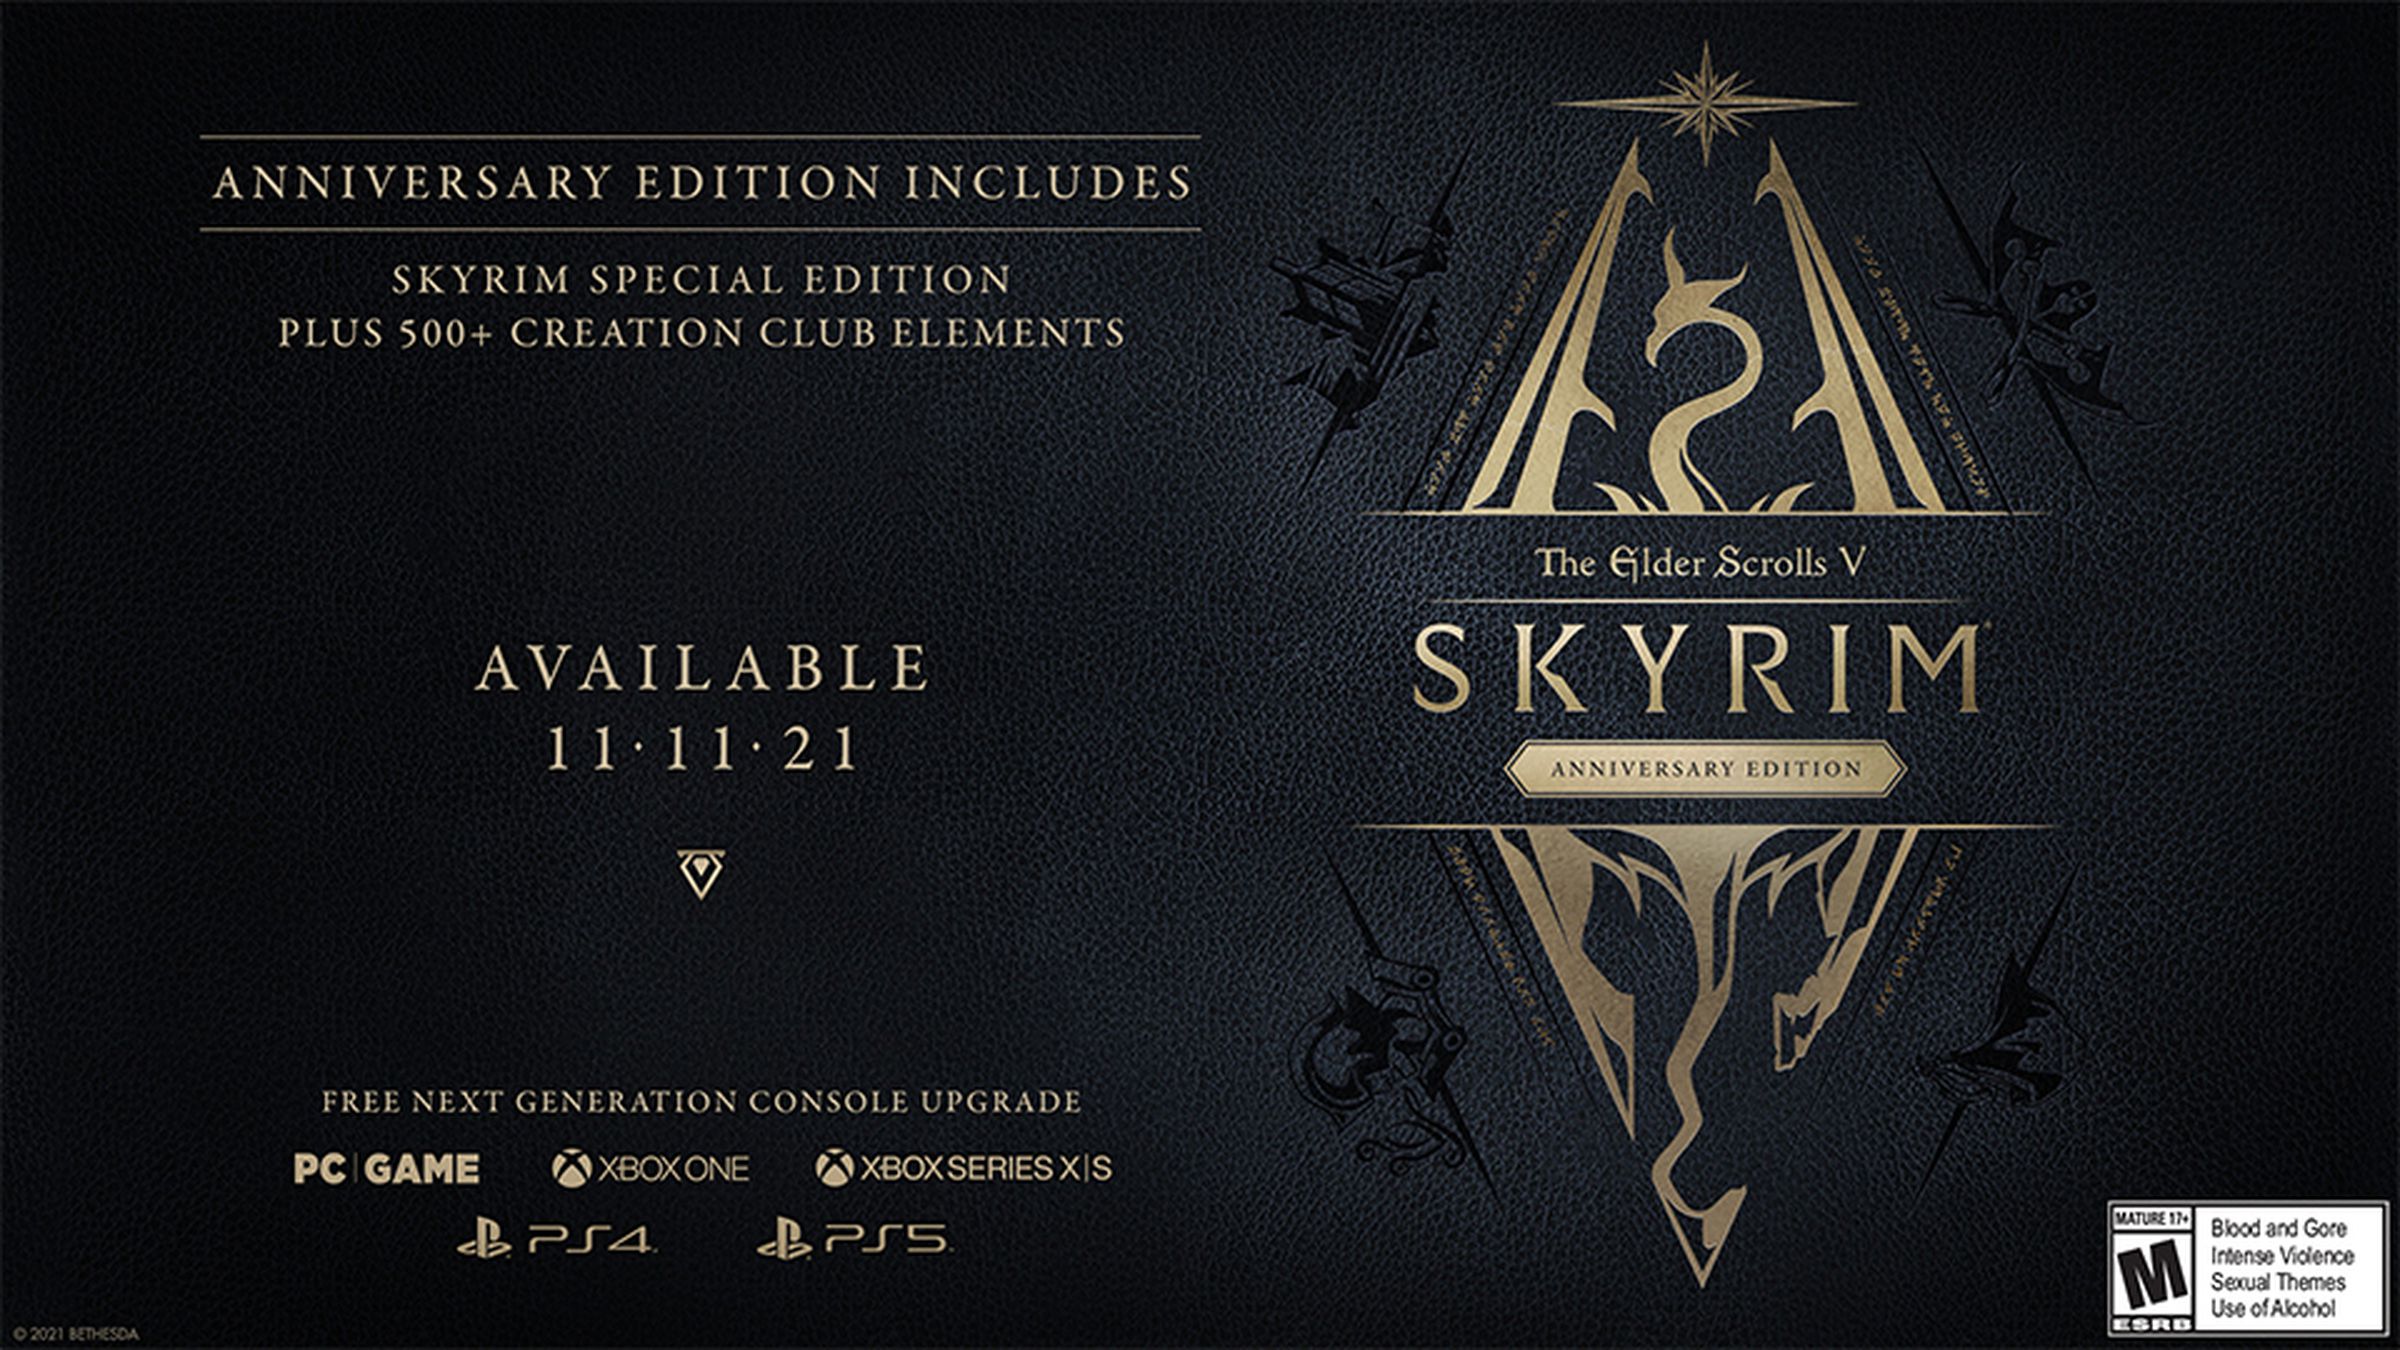 Skyrim Anniversary Edition will be released on November 11th.